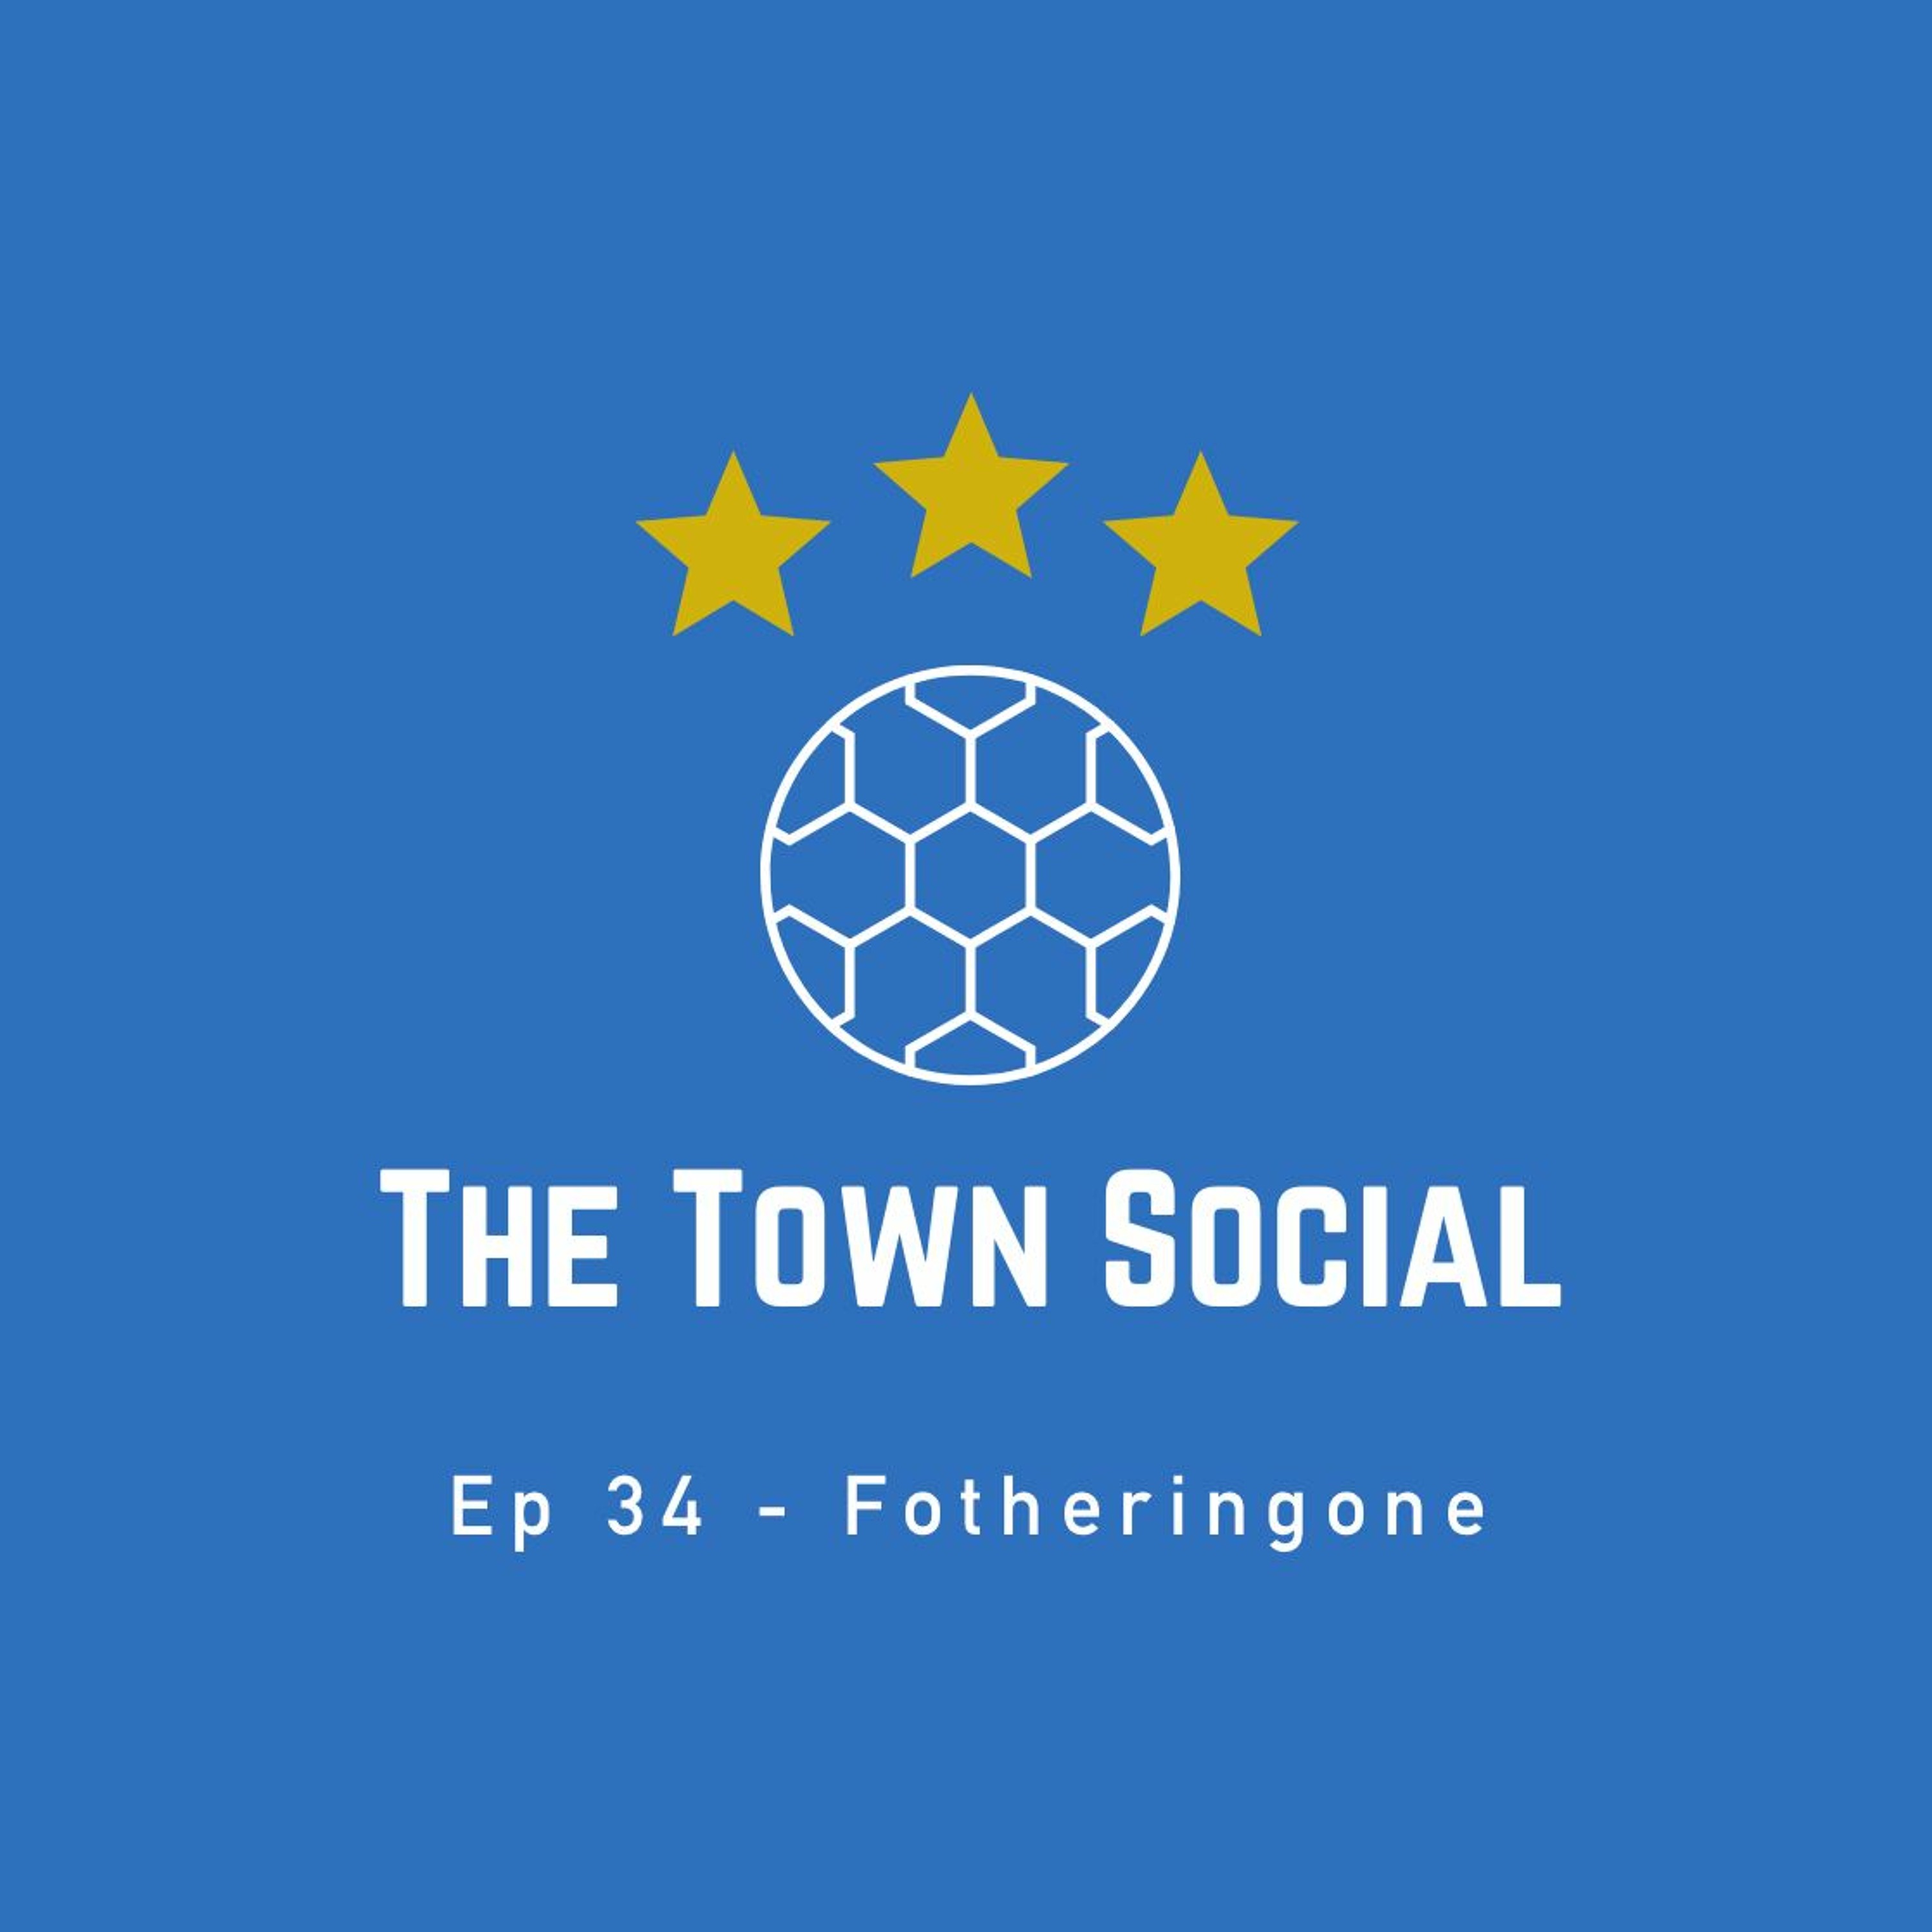 FotherinGONE - The Town Social - Ep 34